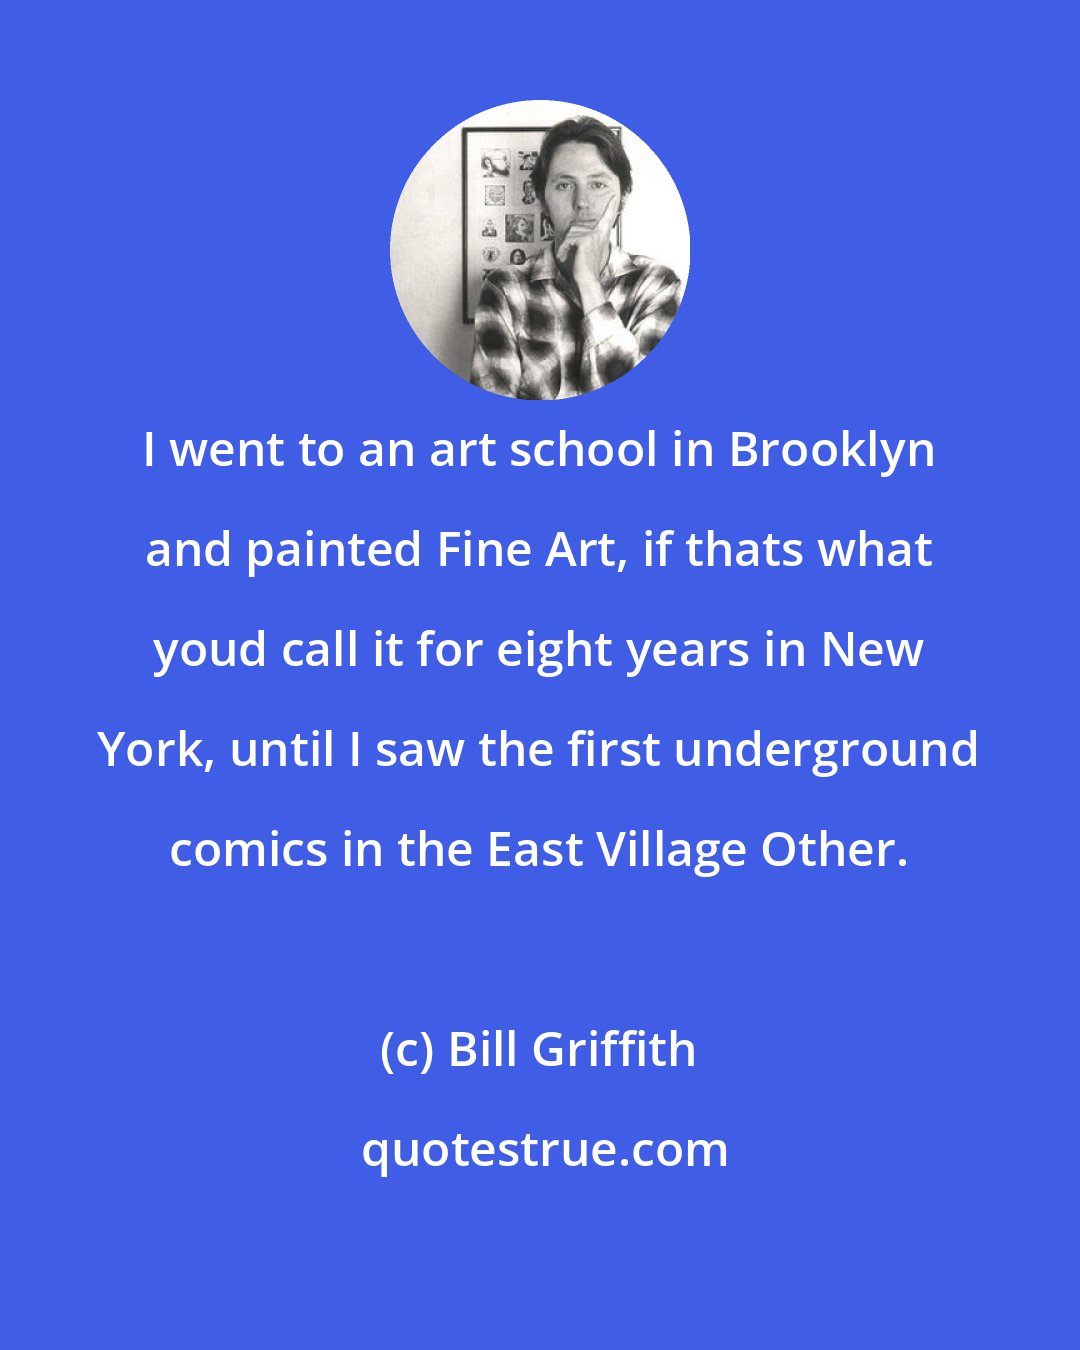 Bill Griffith: I went to an art school in Brooklyn and painted Fine Art, if thats what youd call it for eight years in New York, until I saw the first underground comics in the East Village Other.